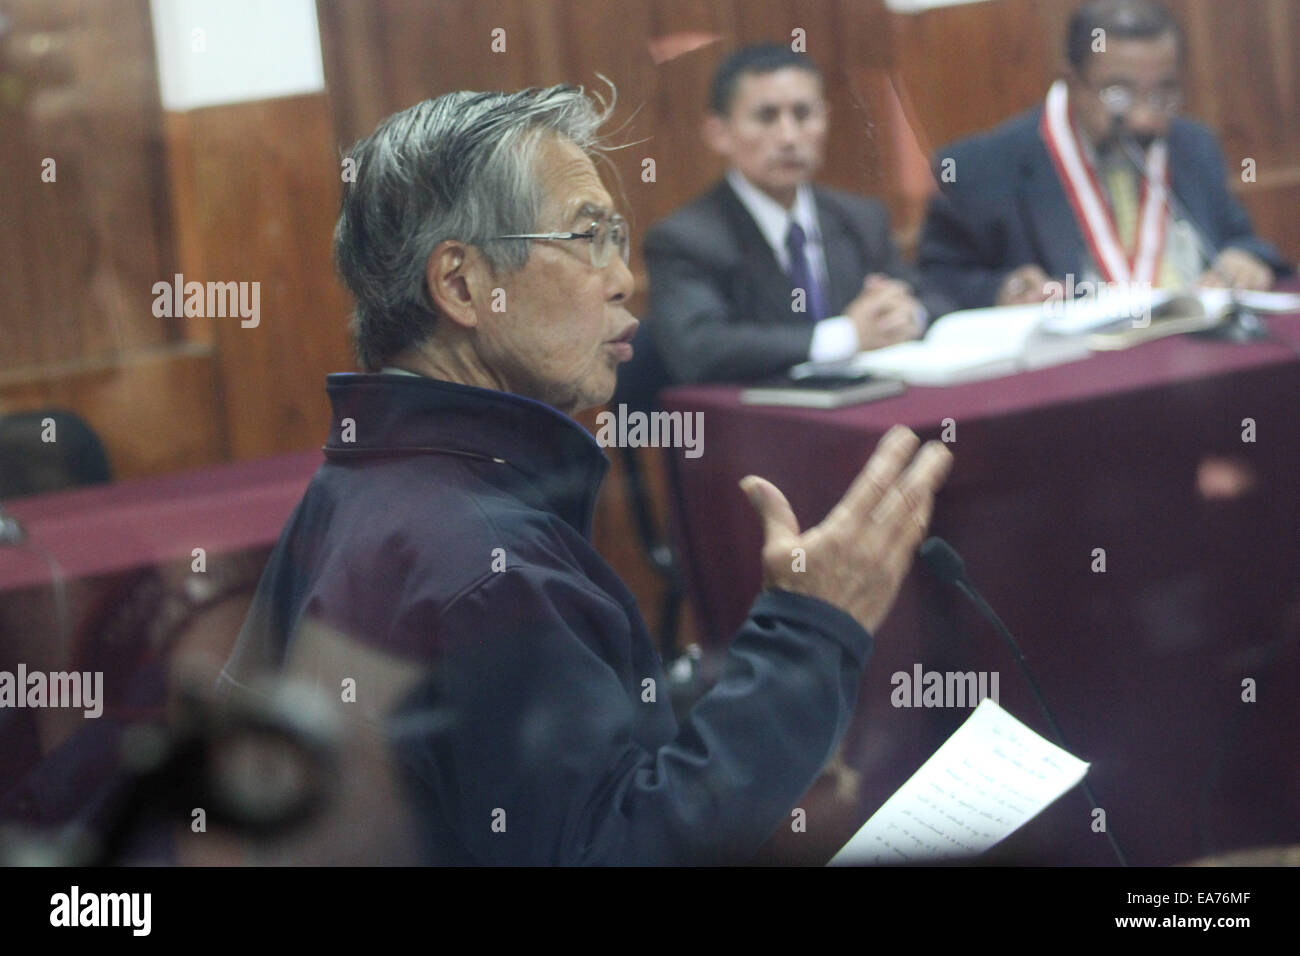 (141107) -- LIMA, Nov. 7, 2014 (Xinhua) -- Former Peruvian President Alberto Fujimori (L) attends an appeal hearing to ask for house arrest, in the Special Criminal Chamber of the Supreme Court of the Operations Directorate of the National Police (DINOES), in Lima city, capital of Peru, on Nov. 7, 2014. An appeal hearing took place in the Special Criminal Chamber of the Supreme Court where Former Peruvian President Alberto Fujimori, who is serving a sentence of 25 years in prison, asked to finish the remaining years of his sentence under house arrest, according to local press. (Xinhua/Luis Cam Stock Photo